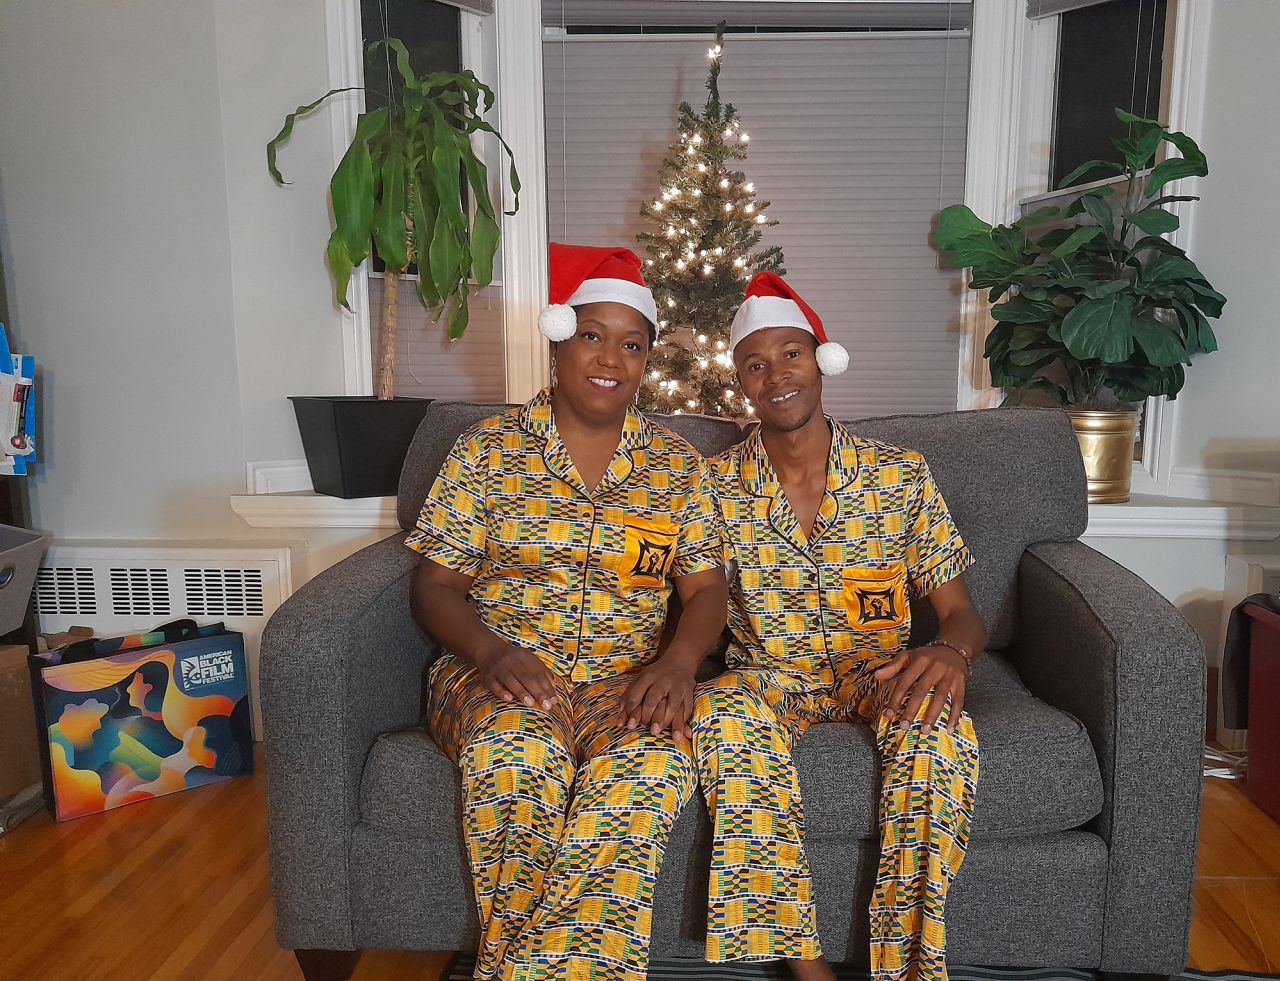 <strong>Business partners:</strong> Rachel and Honoré also run a business selling warm, Canada-winter-appropriate pajamas with African prints, called <a href="https://www.wokeapparel.shop/" target="_blank" target="_blank">Woke Apparel.</a>